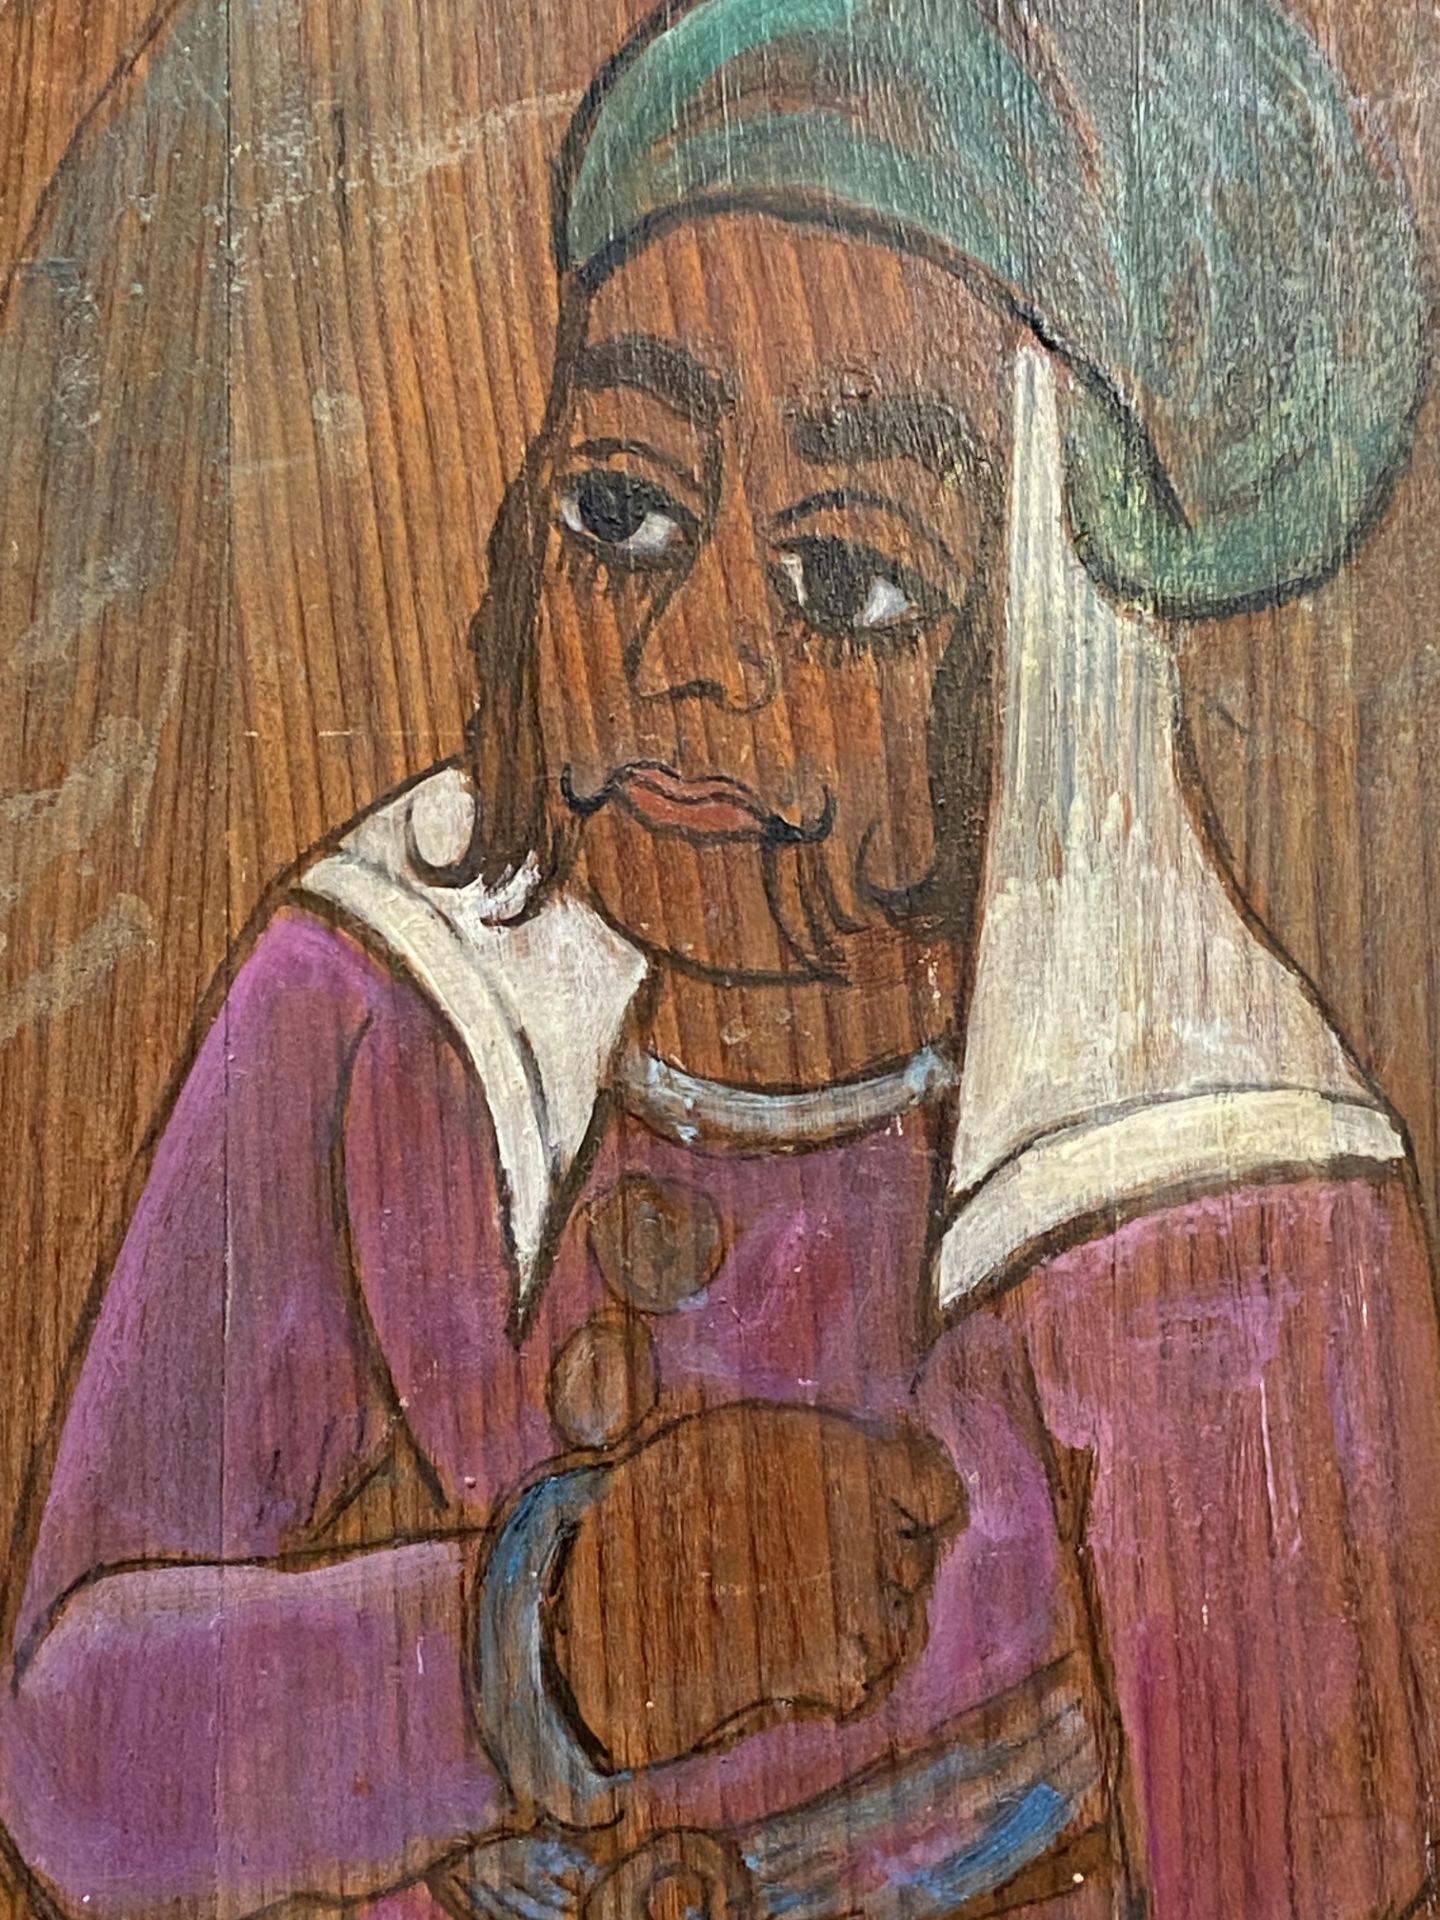 Painting on wood "Persian Prince", by Alex Porter - Image 2 of 4